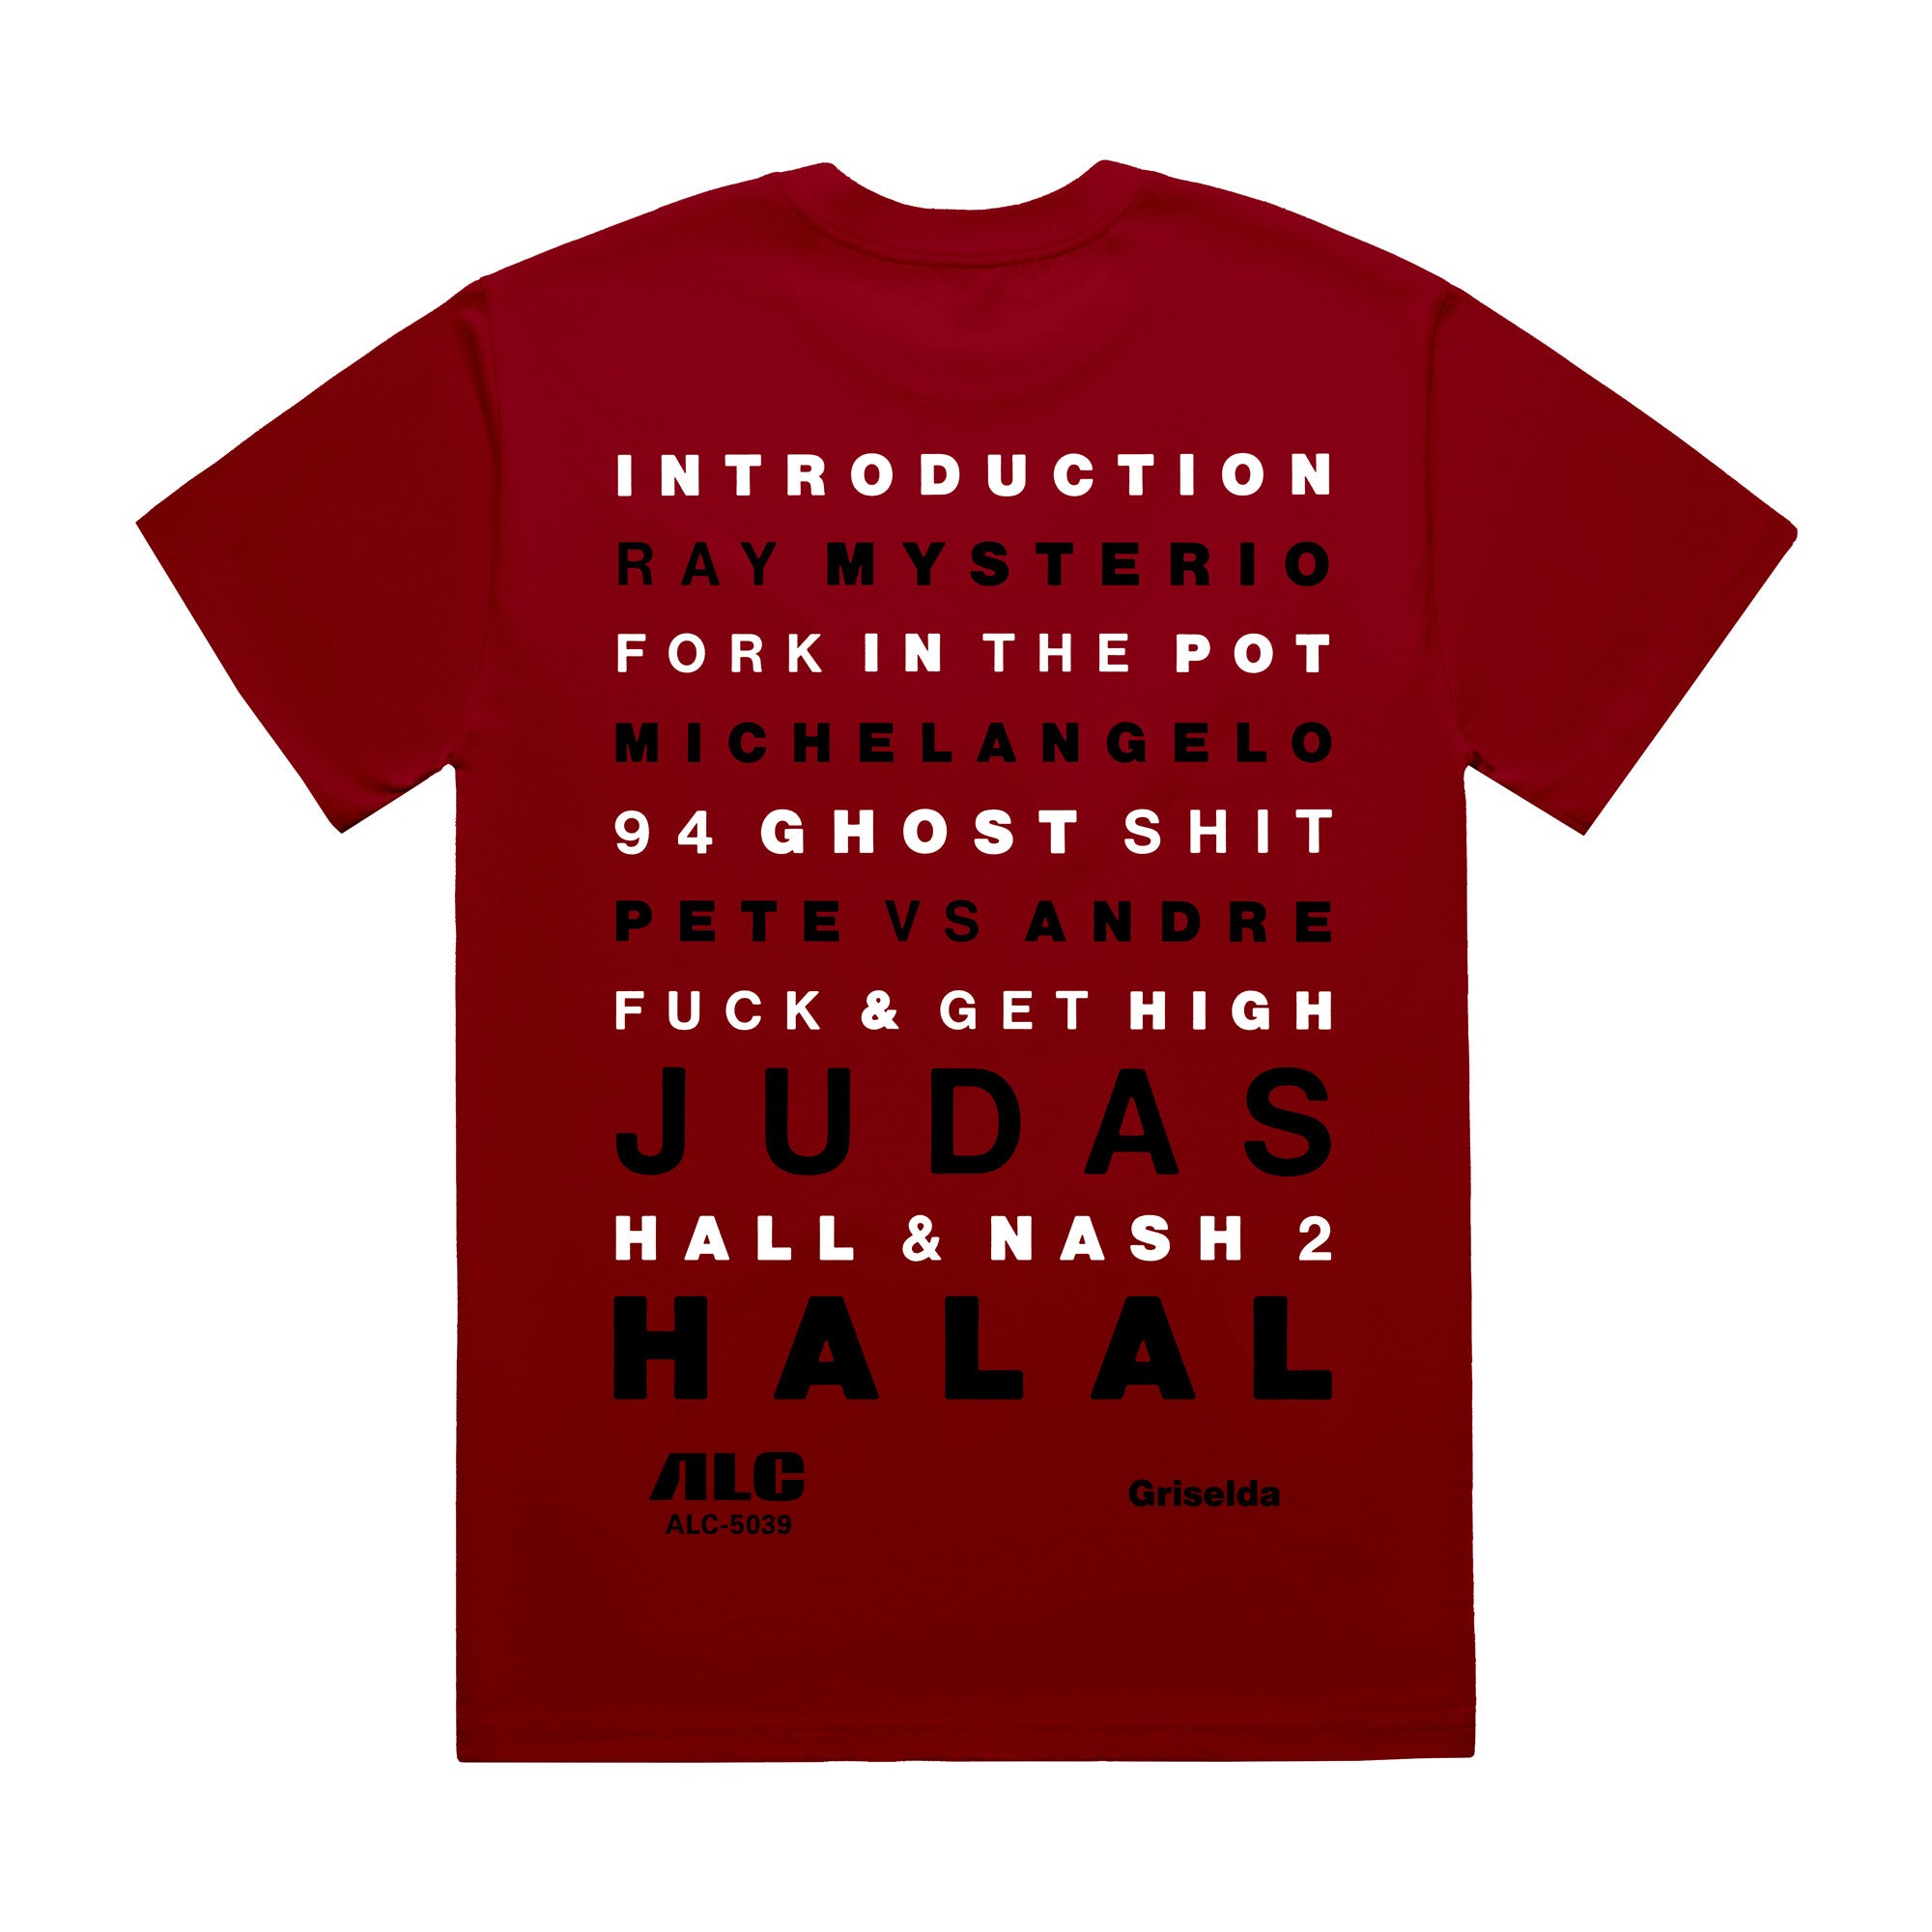 The Ral Duke Edition (Red T-Shirt)